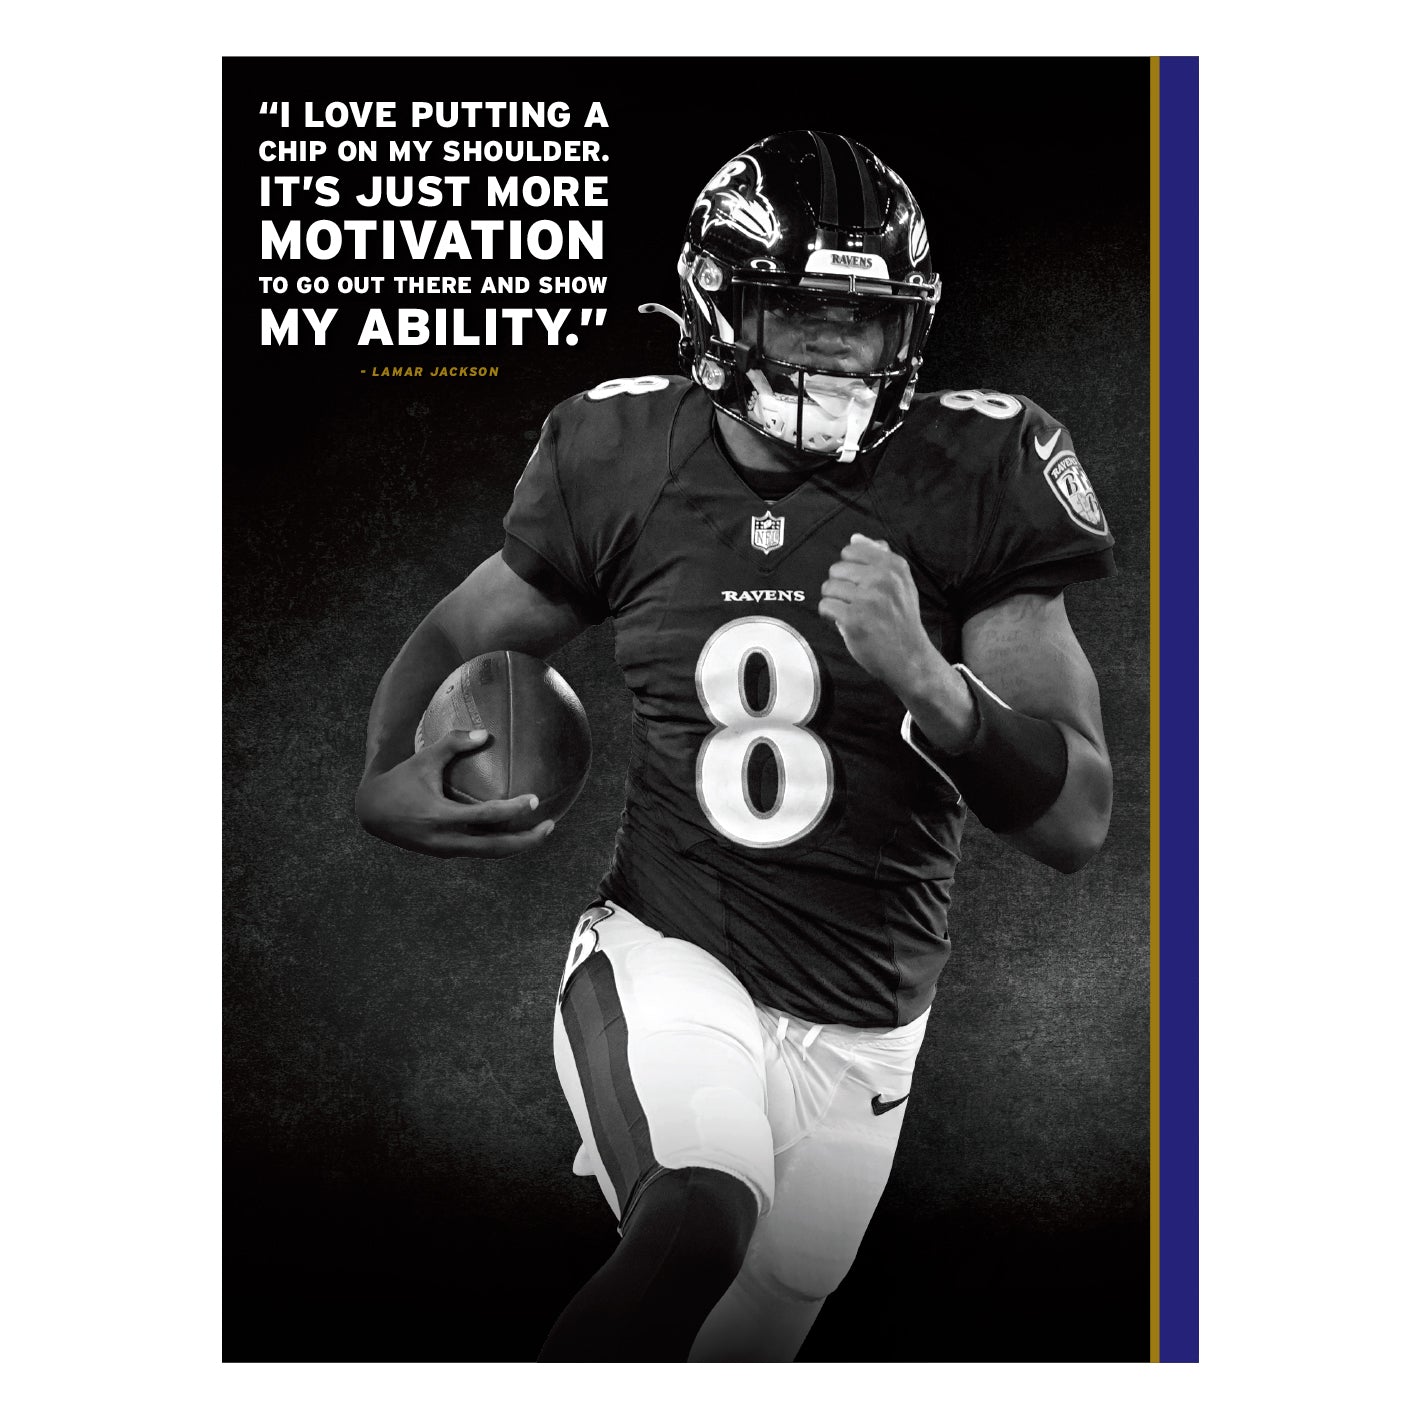 baltimore ravens official site